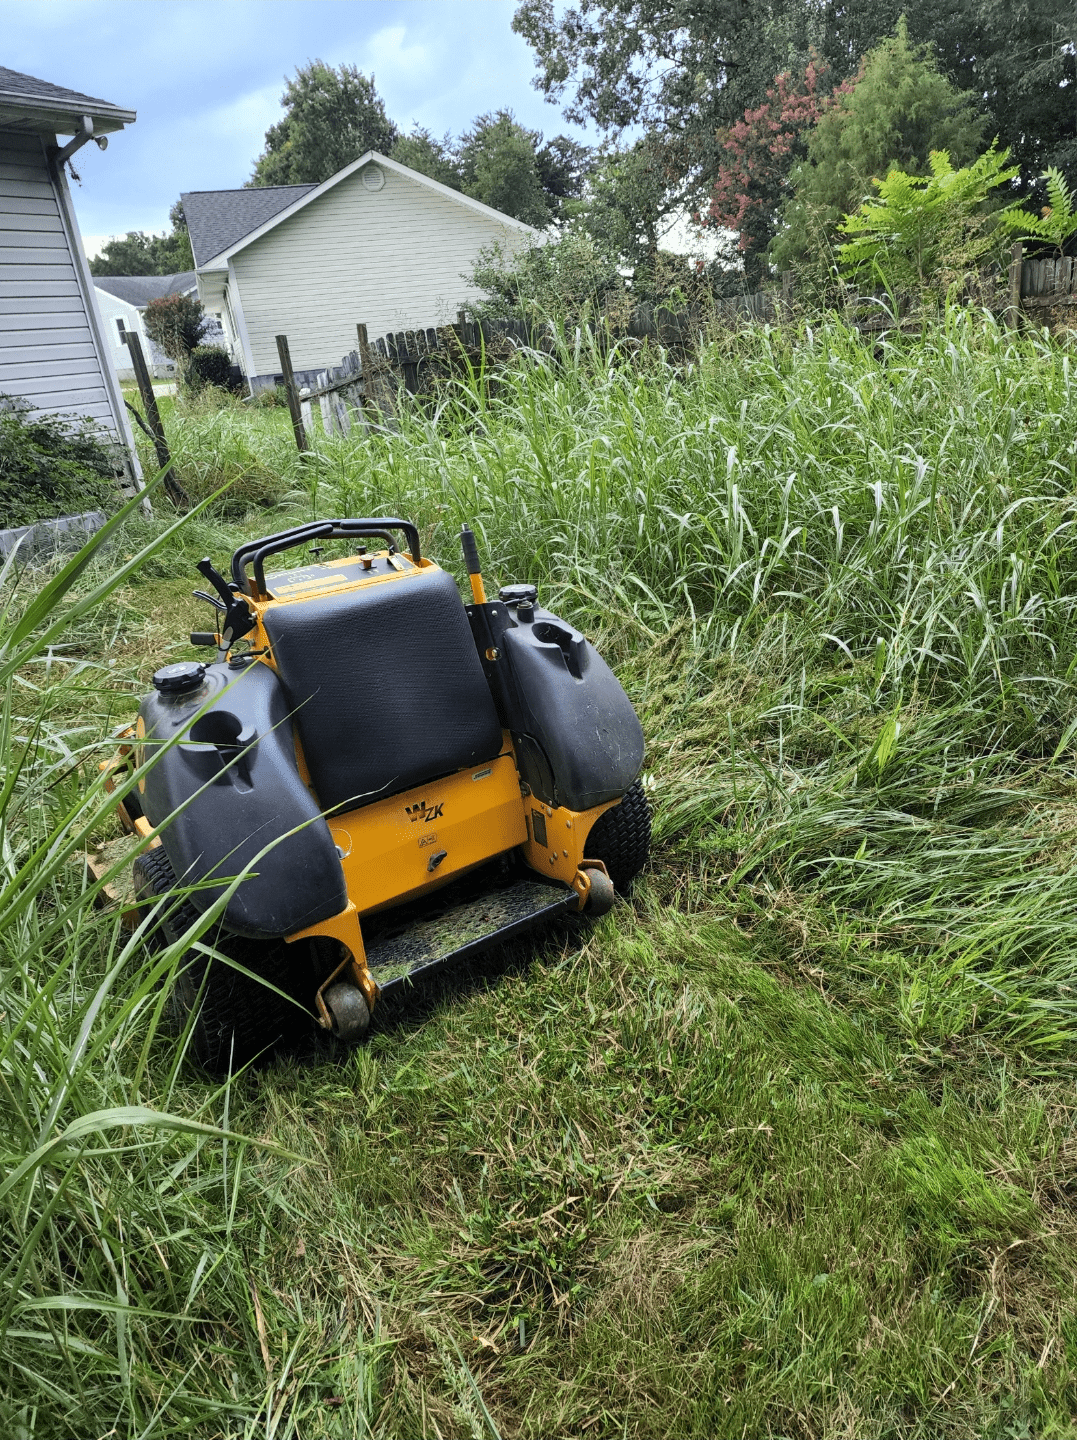 A black and orange riding lawn mower sitting in a severely overgrown lawn on a sunny day